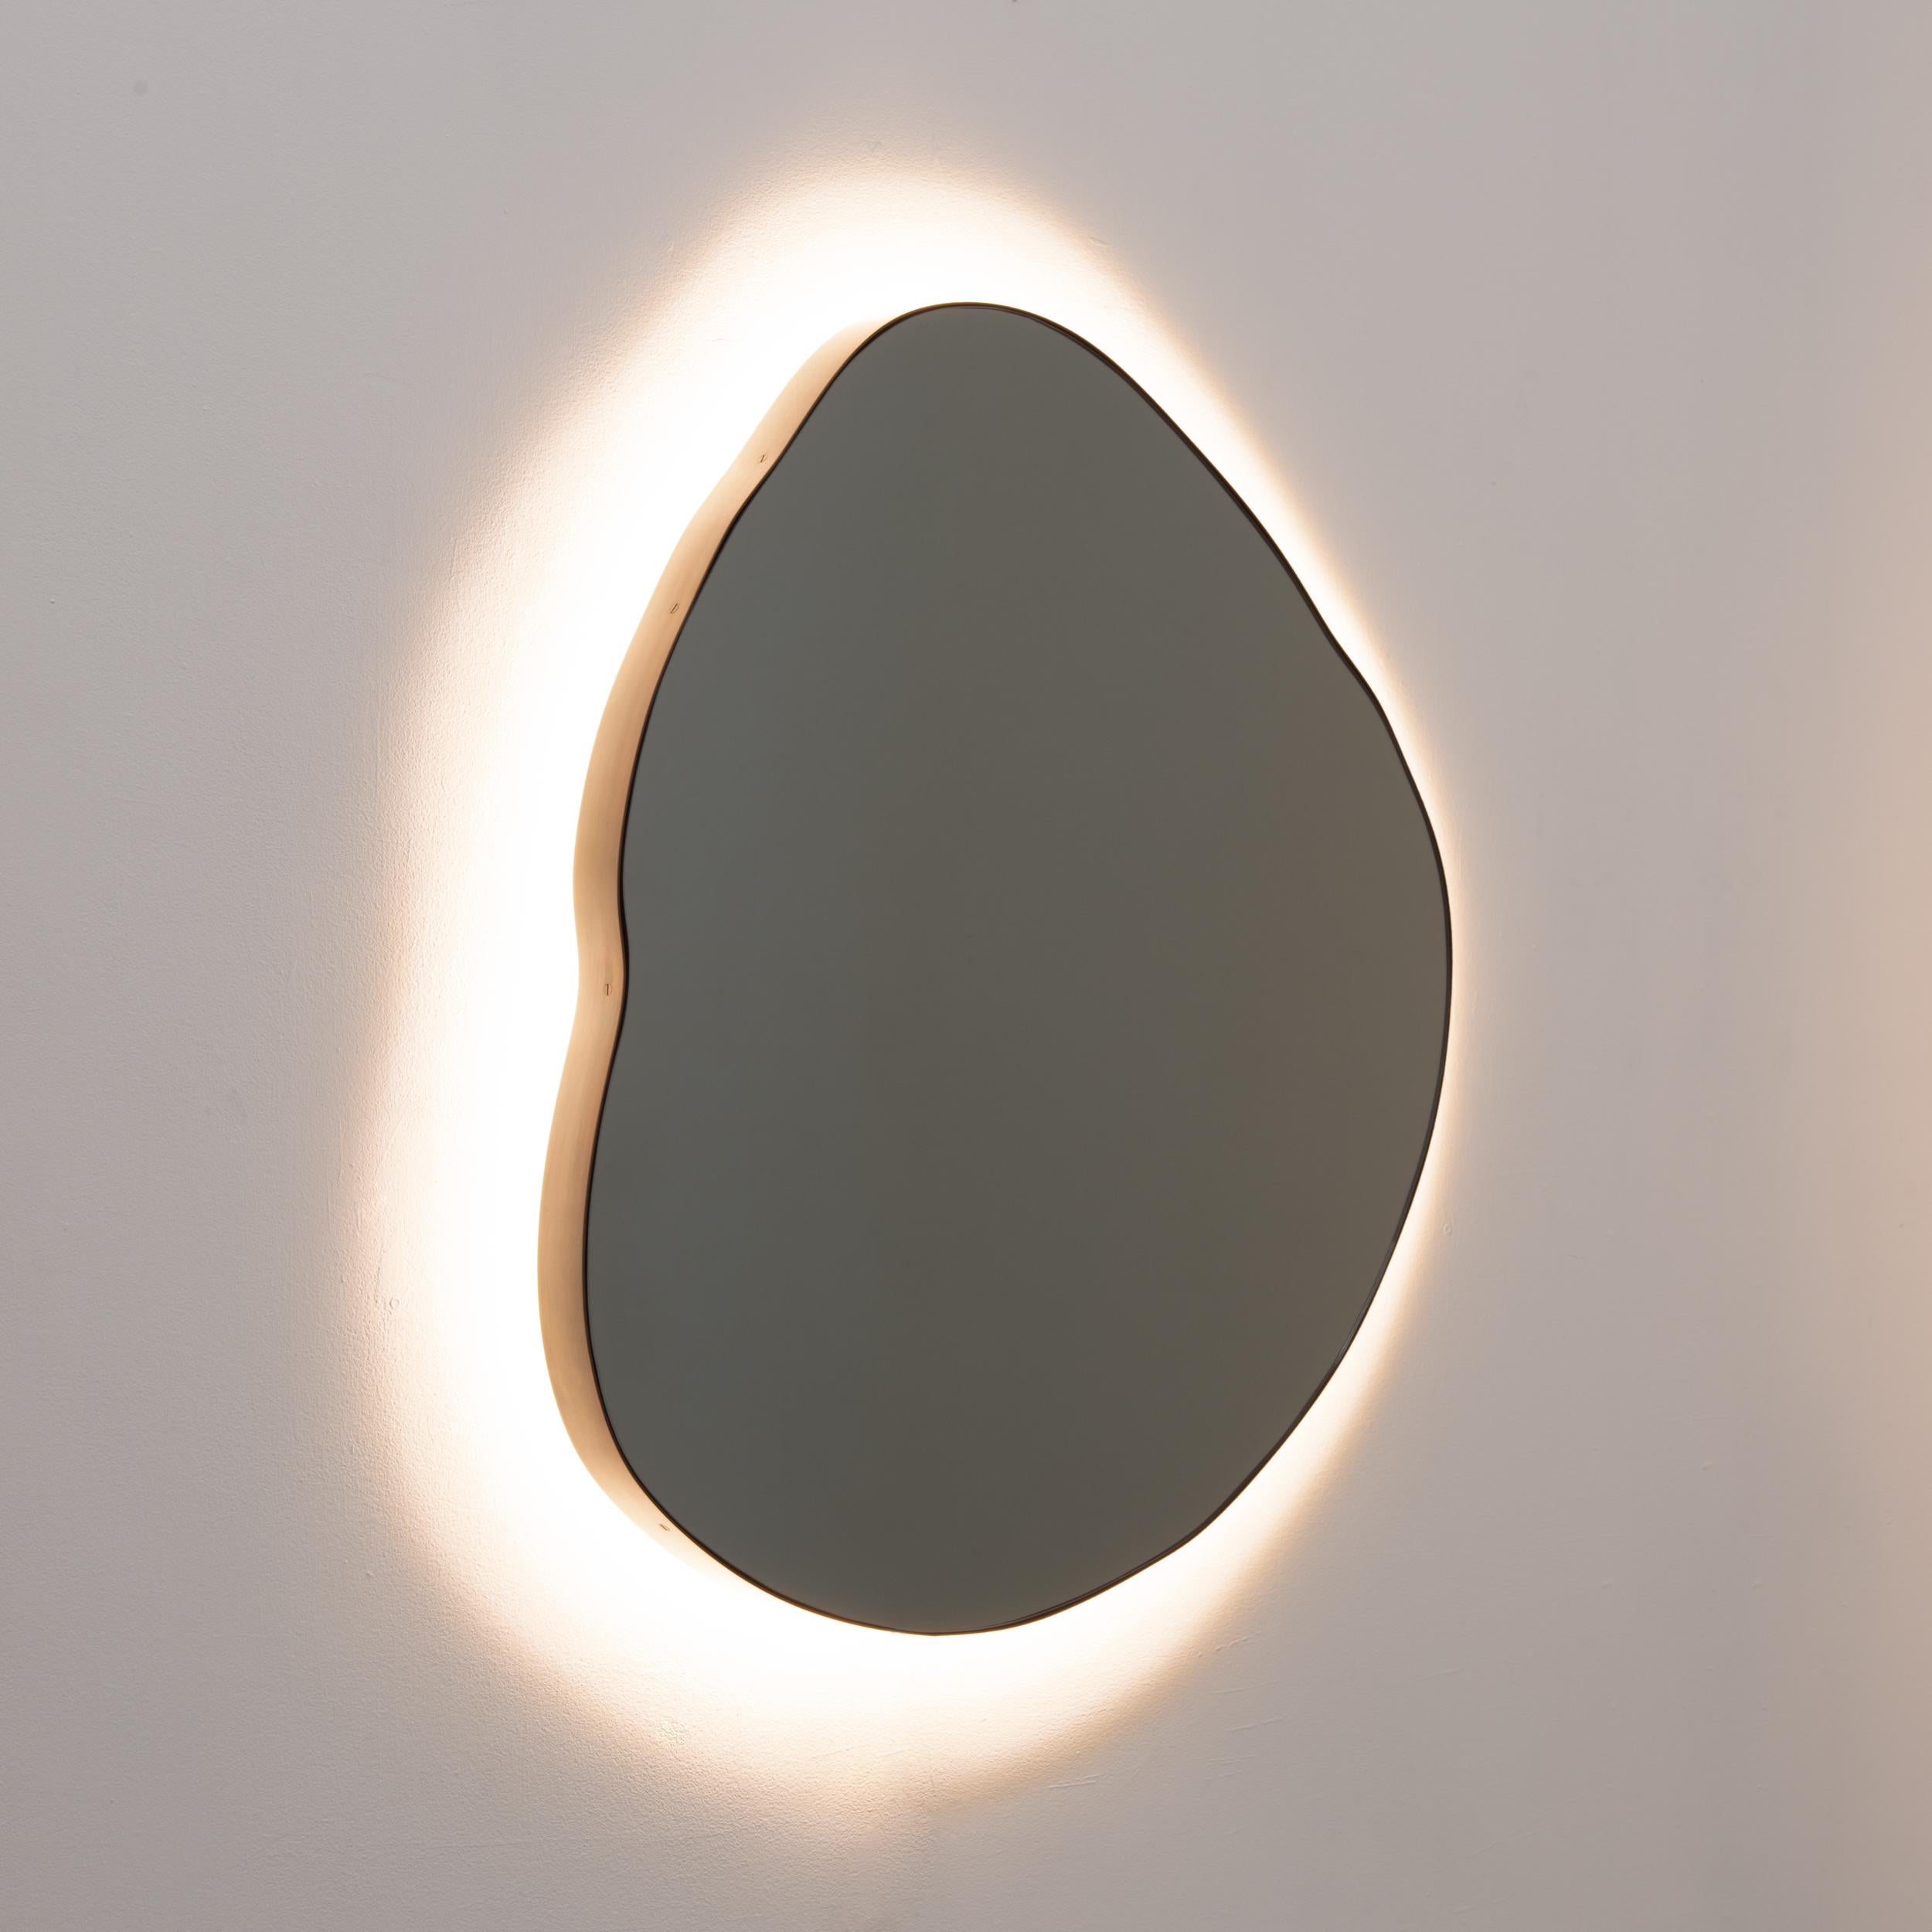 Playful and modern organic shaped back illuminated black tinted mirror with a dark patina brass frame.

All mirrors are fitted with an ingenious French cleat (split batten) system so they may hang flush with the wall in four alternative